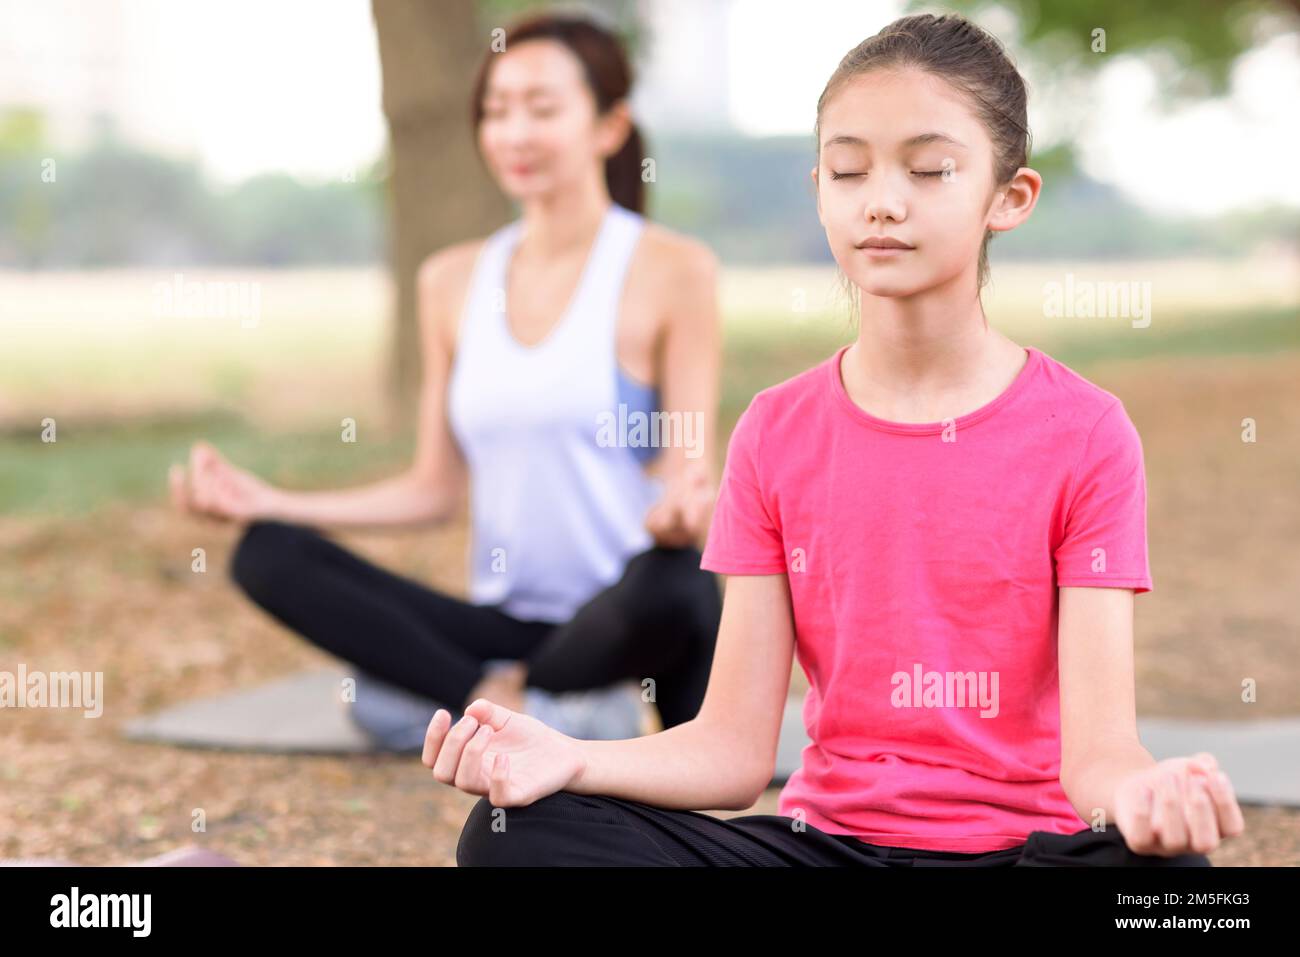 Mother and daughter doing yoga exercises on grass in the park Stock Photo